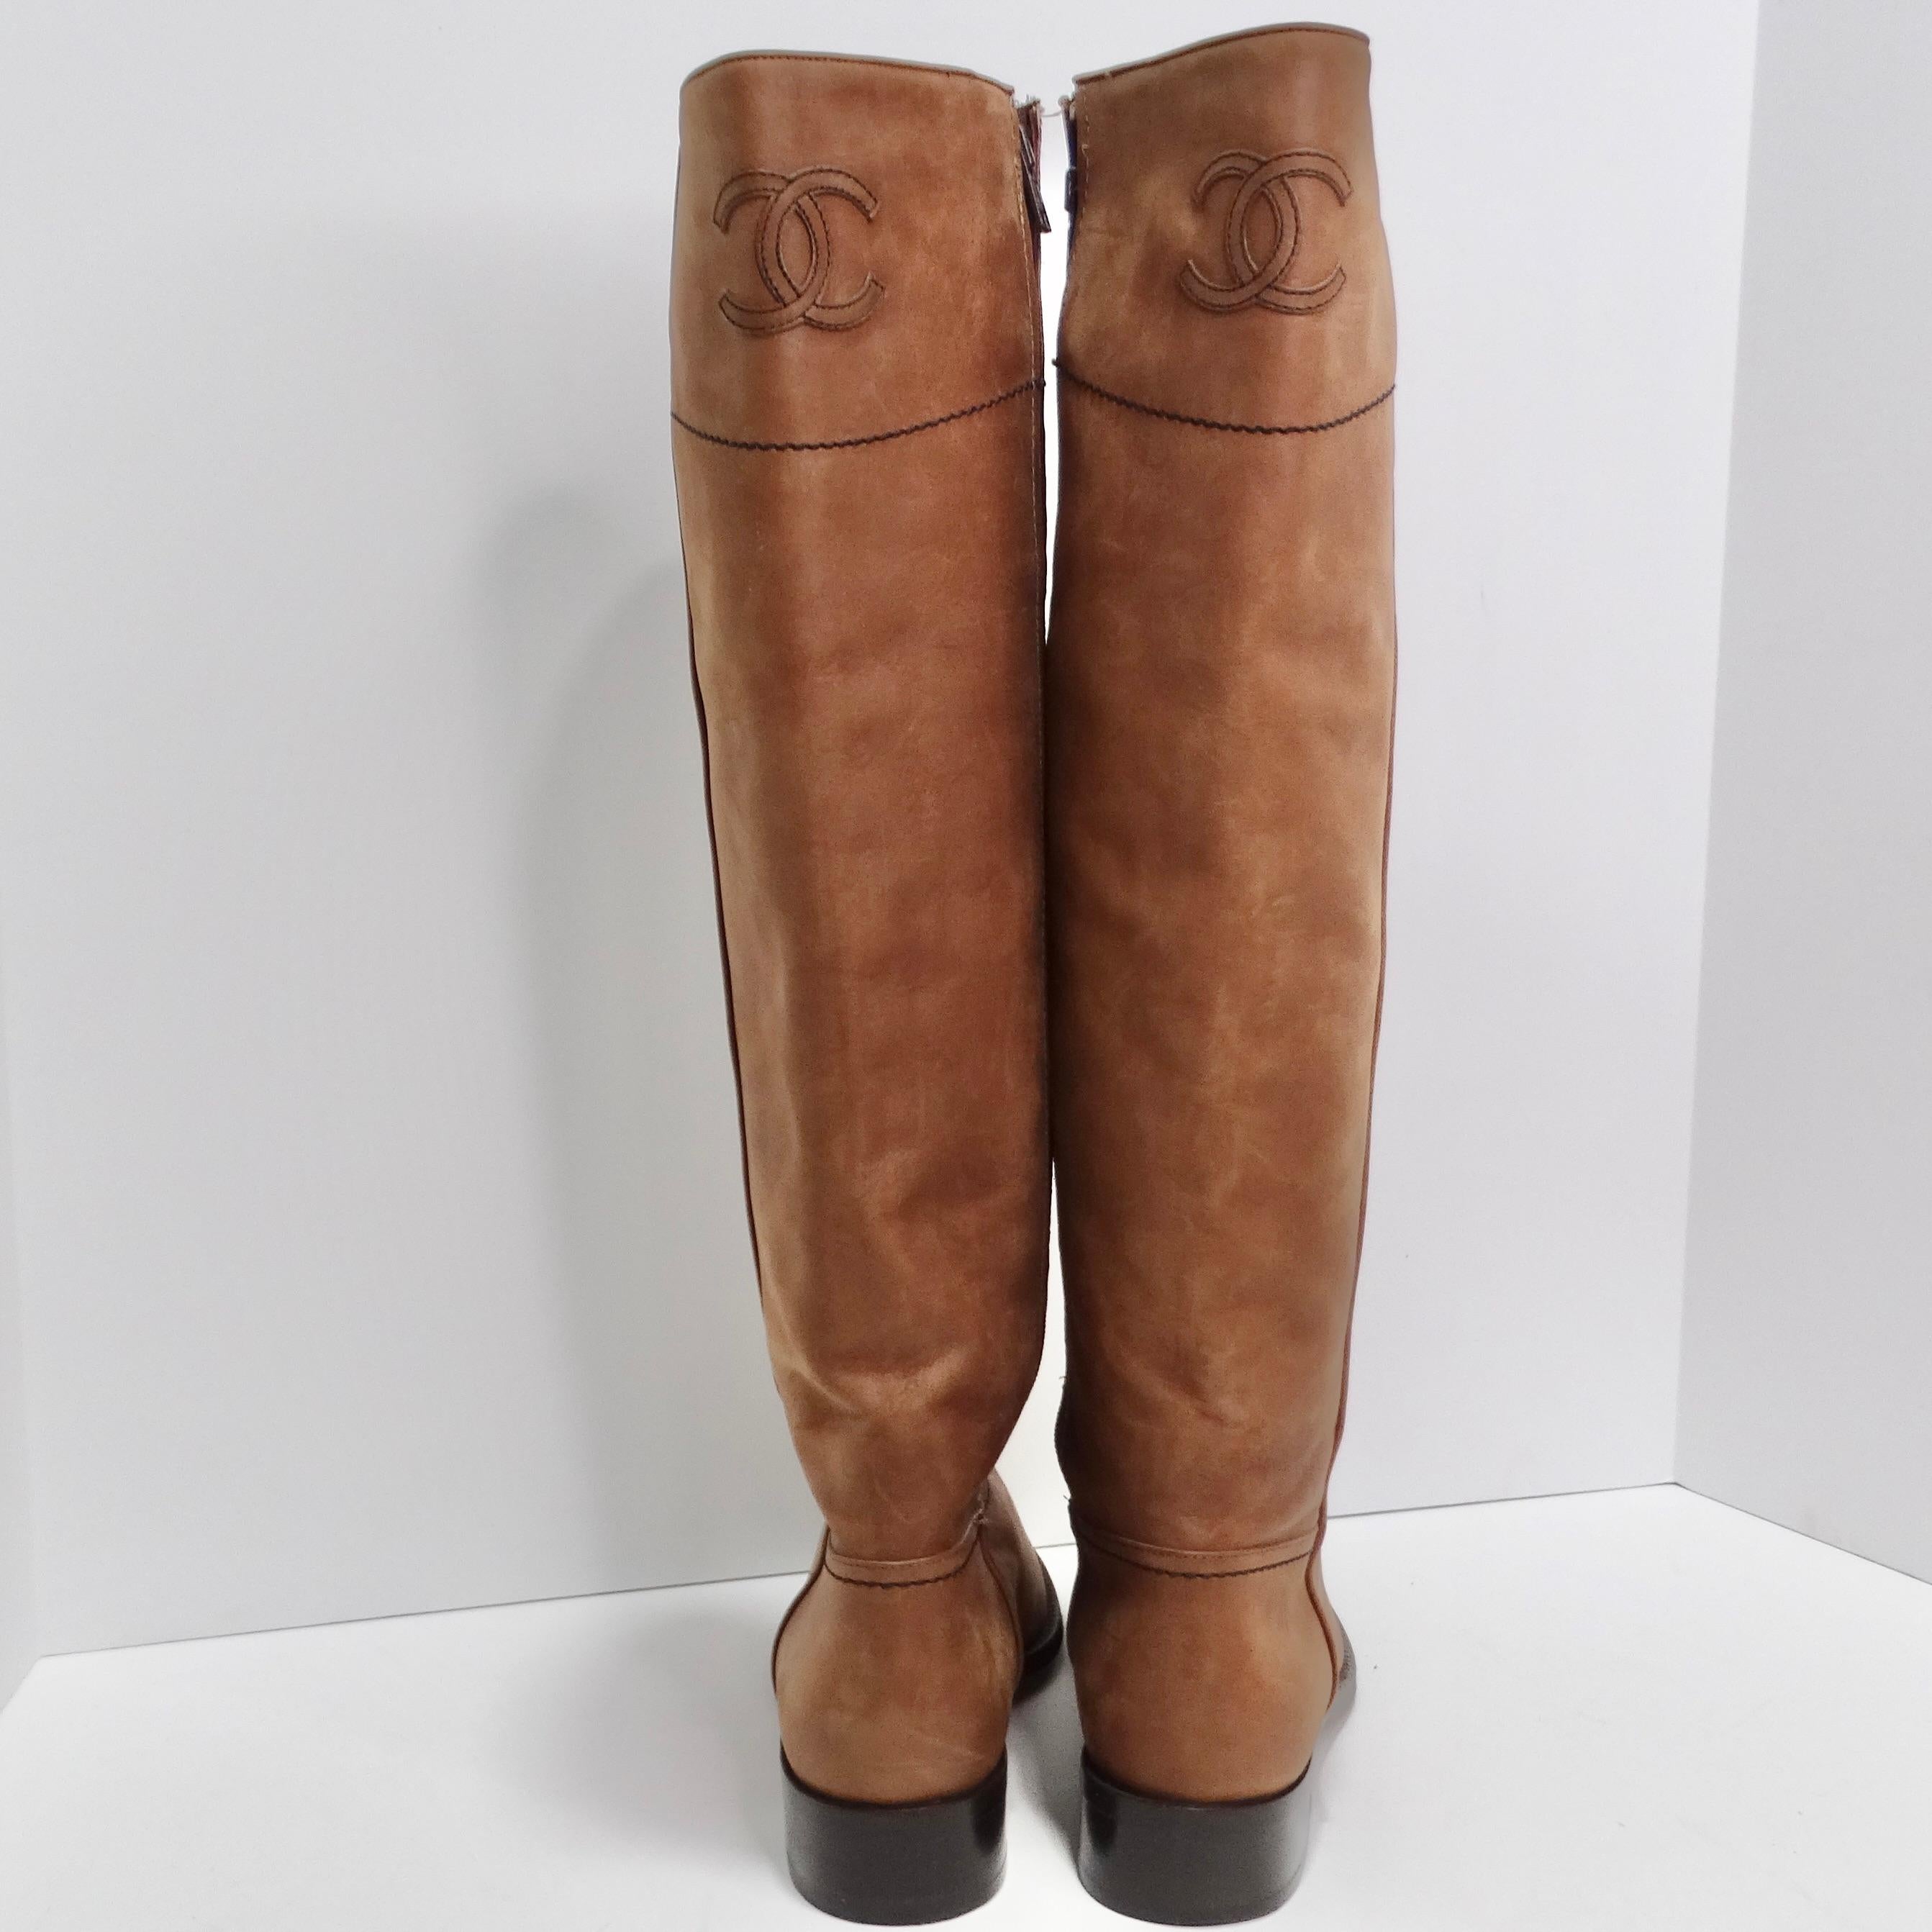 equestrian style boots